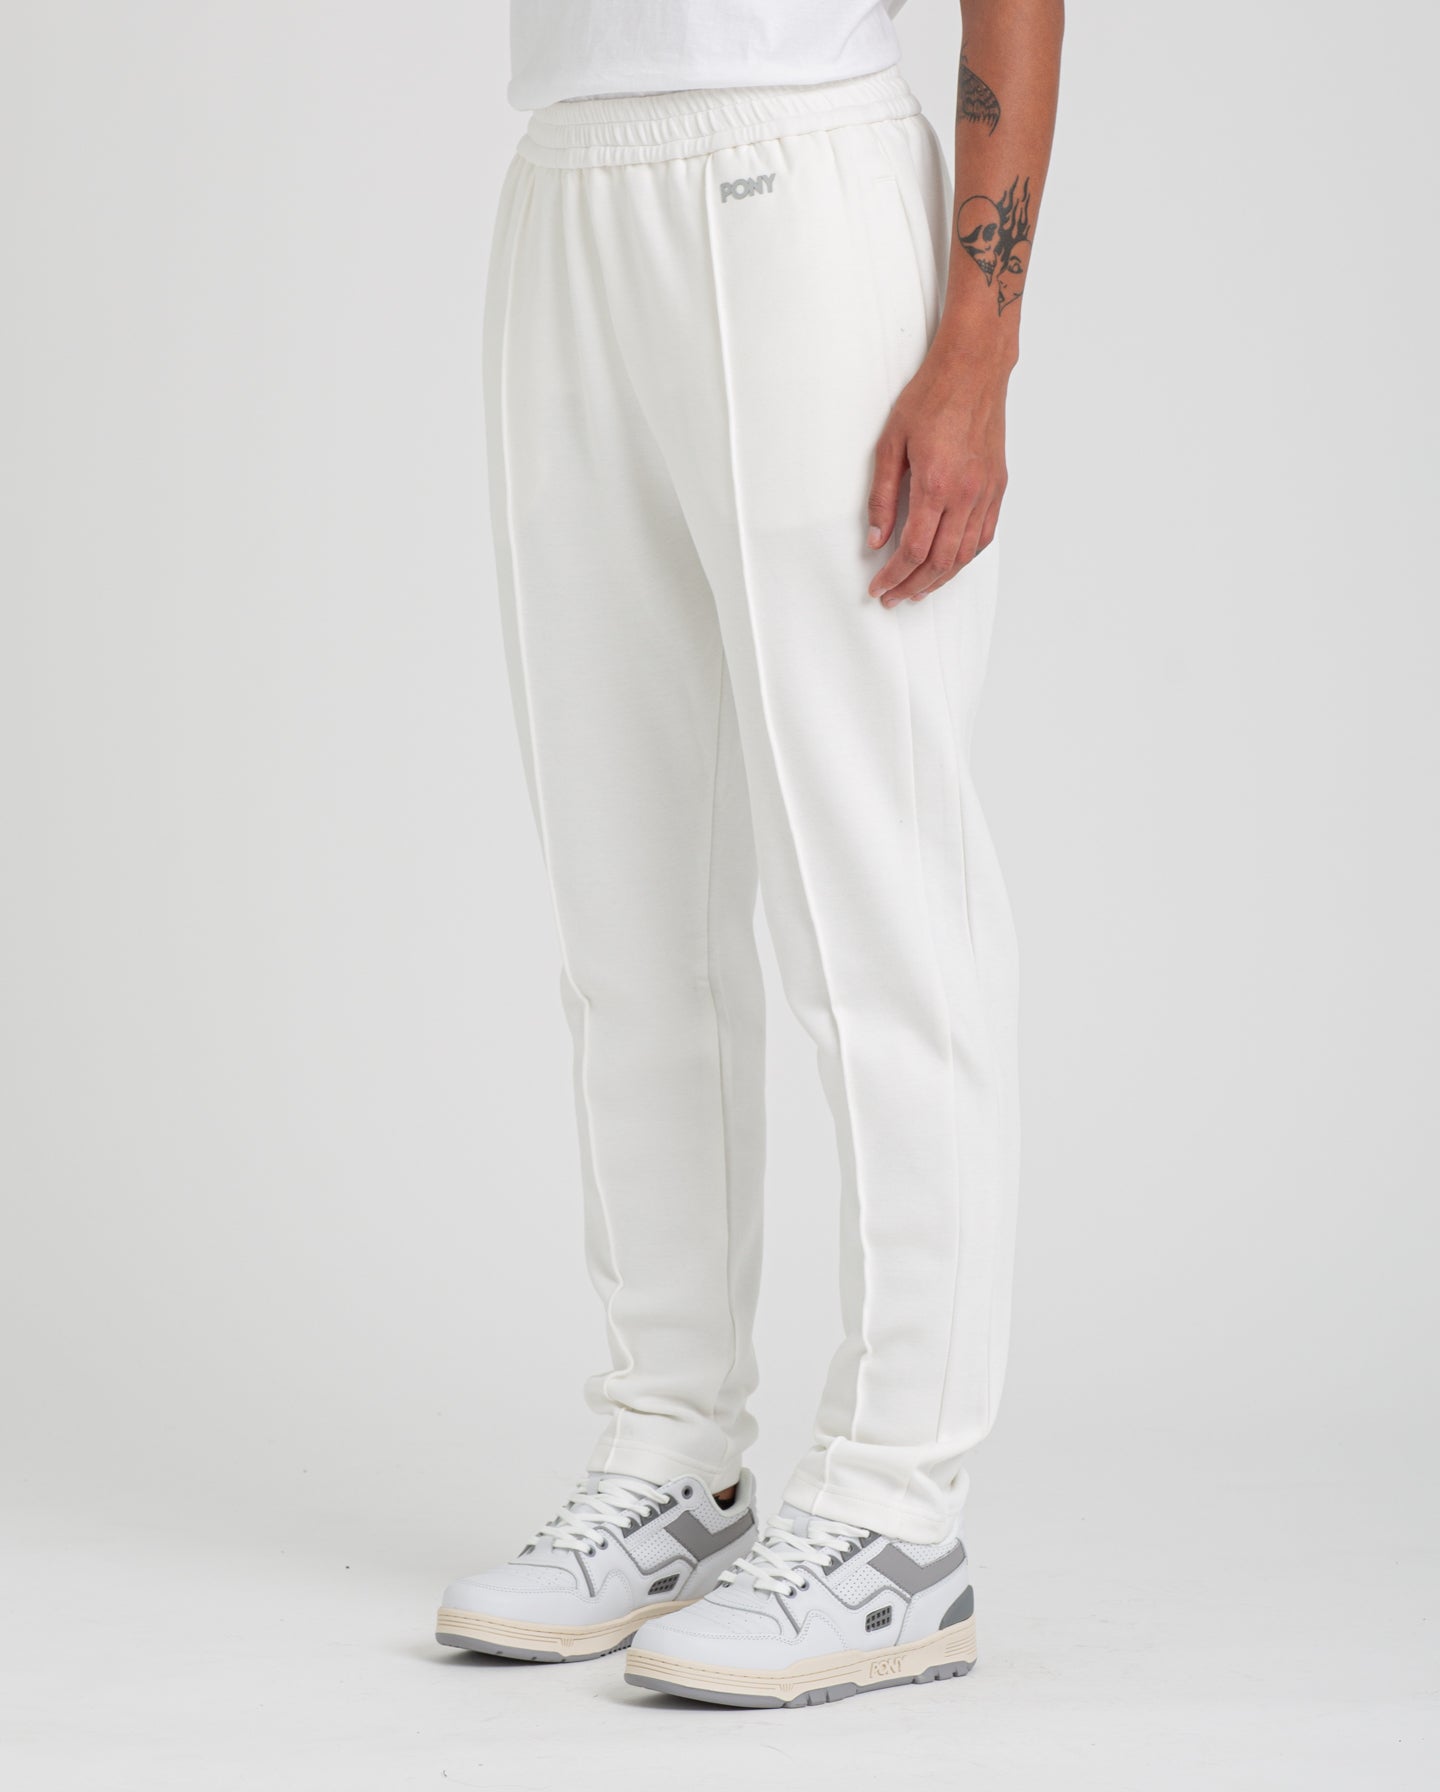 Jogger Pants Nike M NSW Air OH PK Pant White/ Grey | Queens